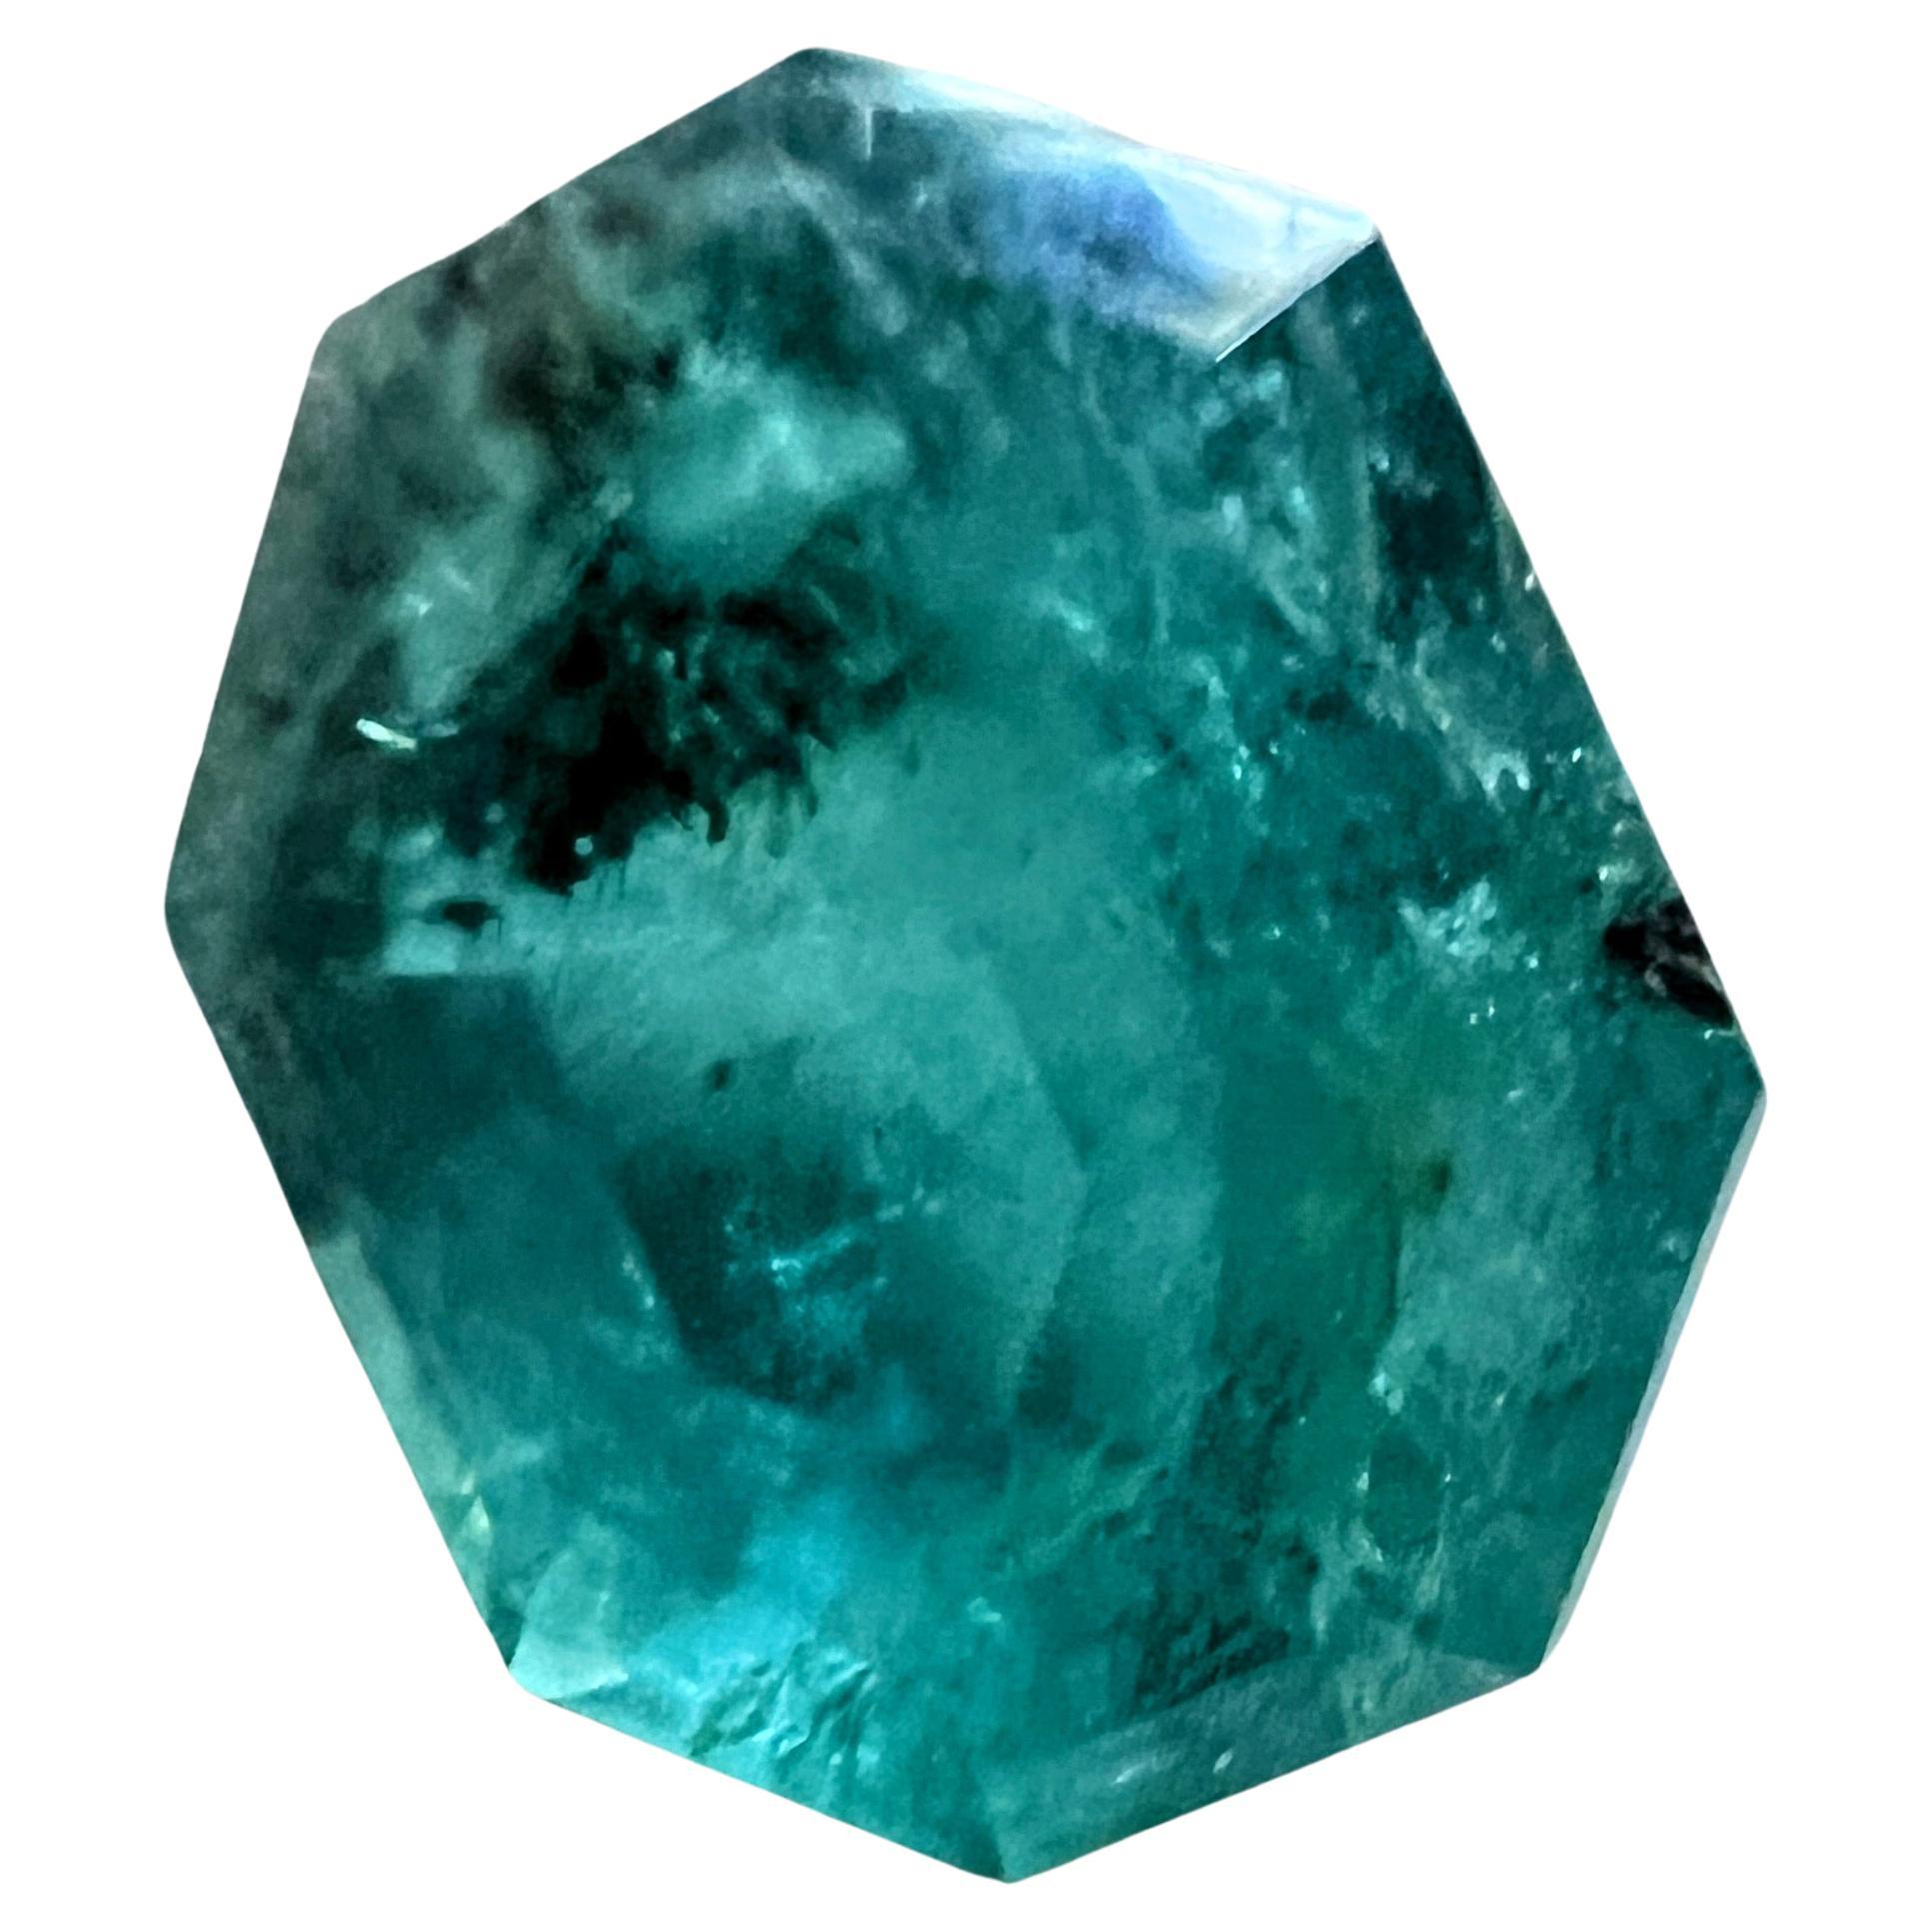 Artisan NO RESERVE 3.28ct Radiant Cut NO-OIL Untreated EMERALD Gemstone For Sale